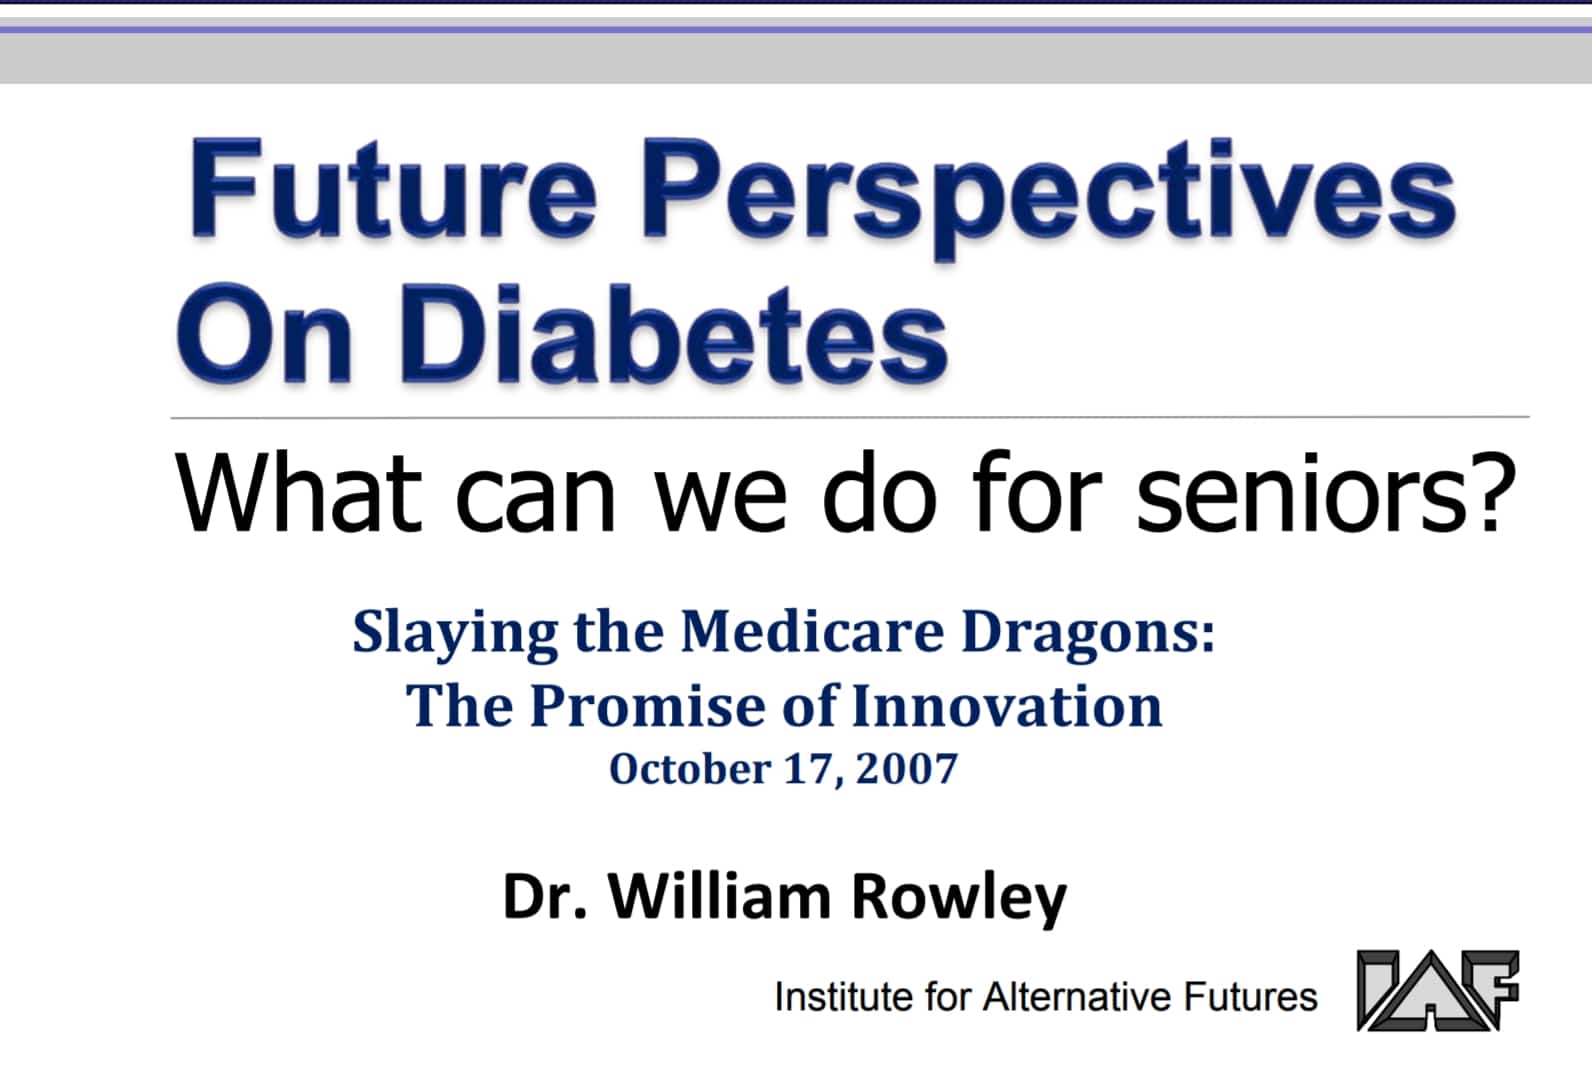 "Future Perspectives on Diabetes" presentation cover.